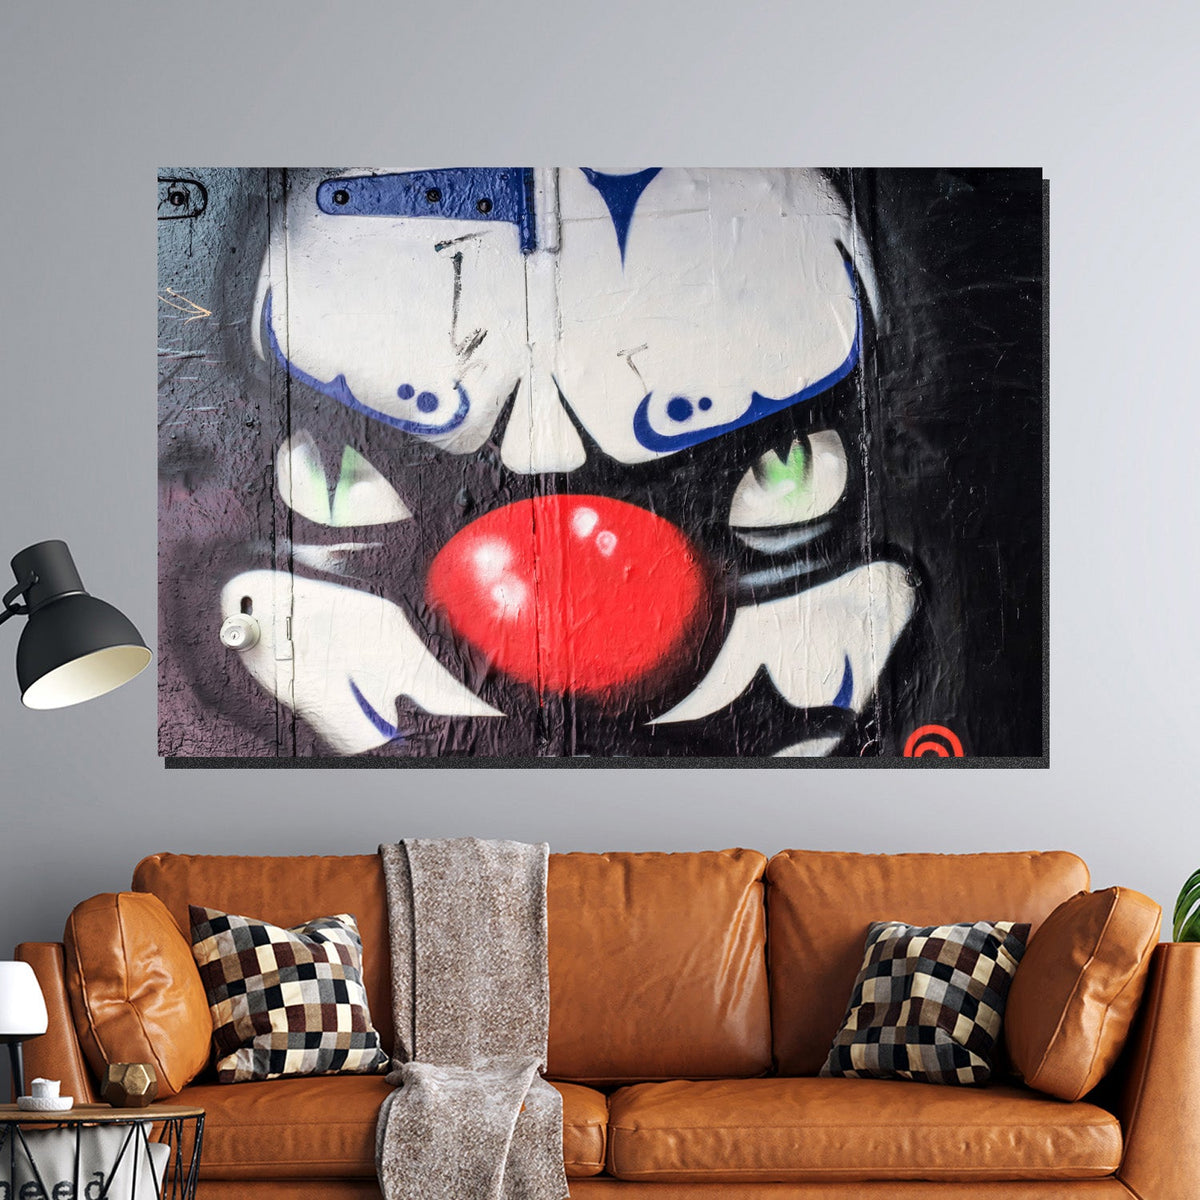 https://cdn.shopify.com/s/files/1/0387/9986/8044/products/TheClownCanvasArtPrintStretched-1.jpg